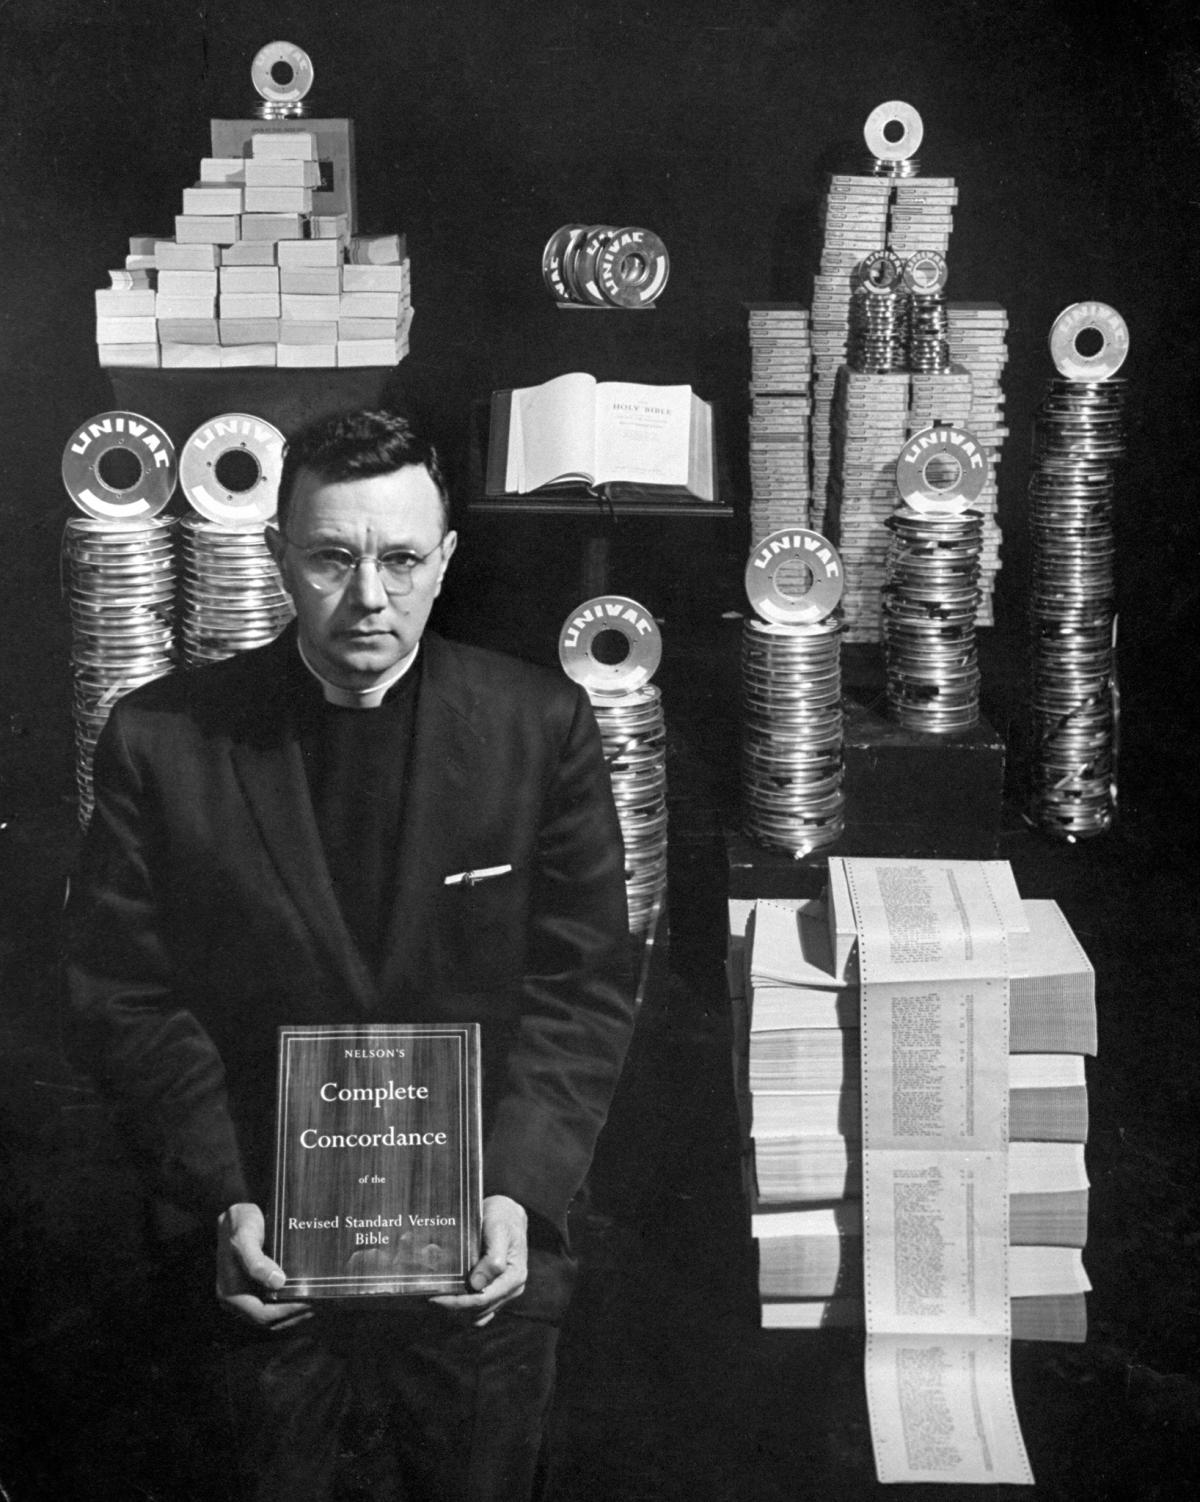 Black and white photo of a man standing in front of tape canisters and computer print outs